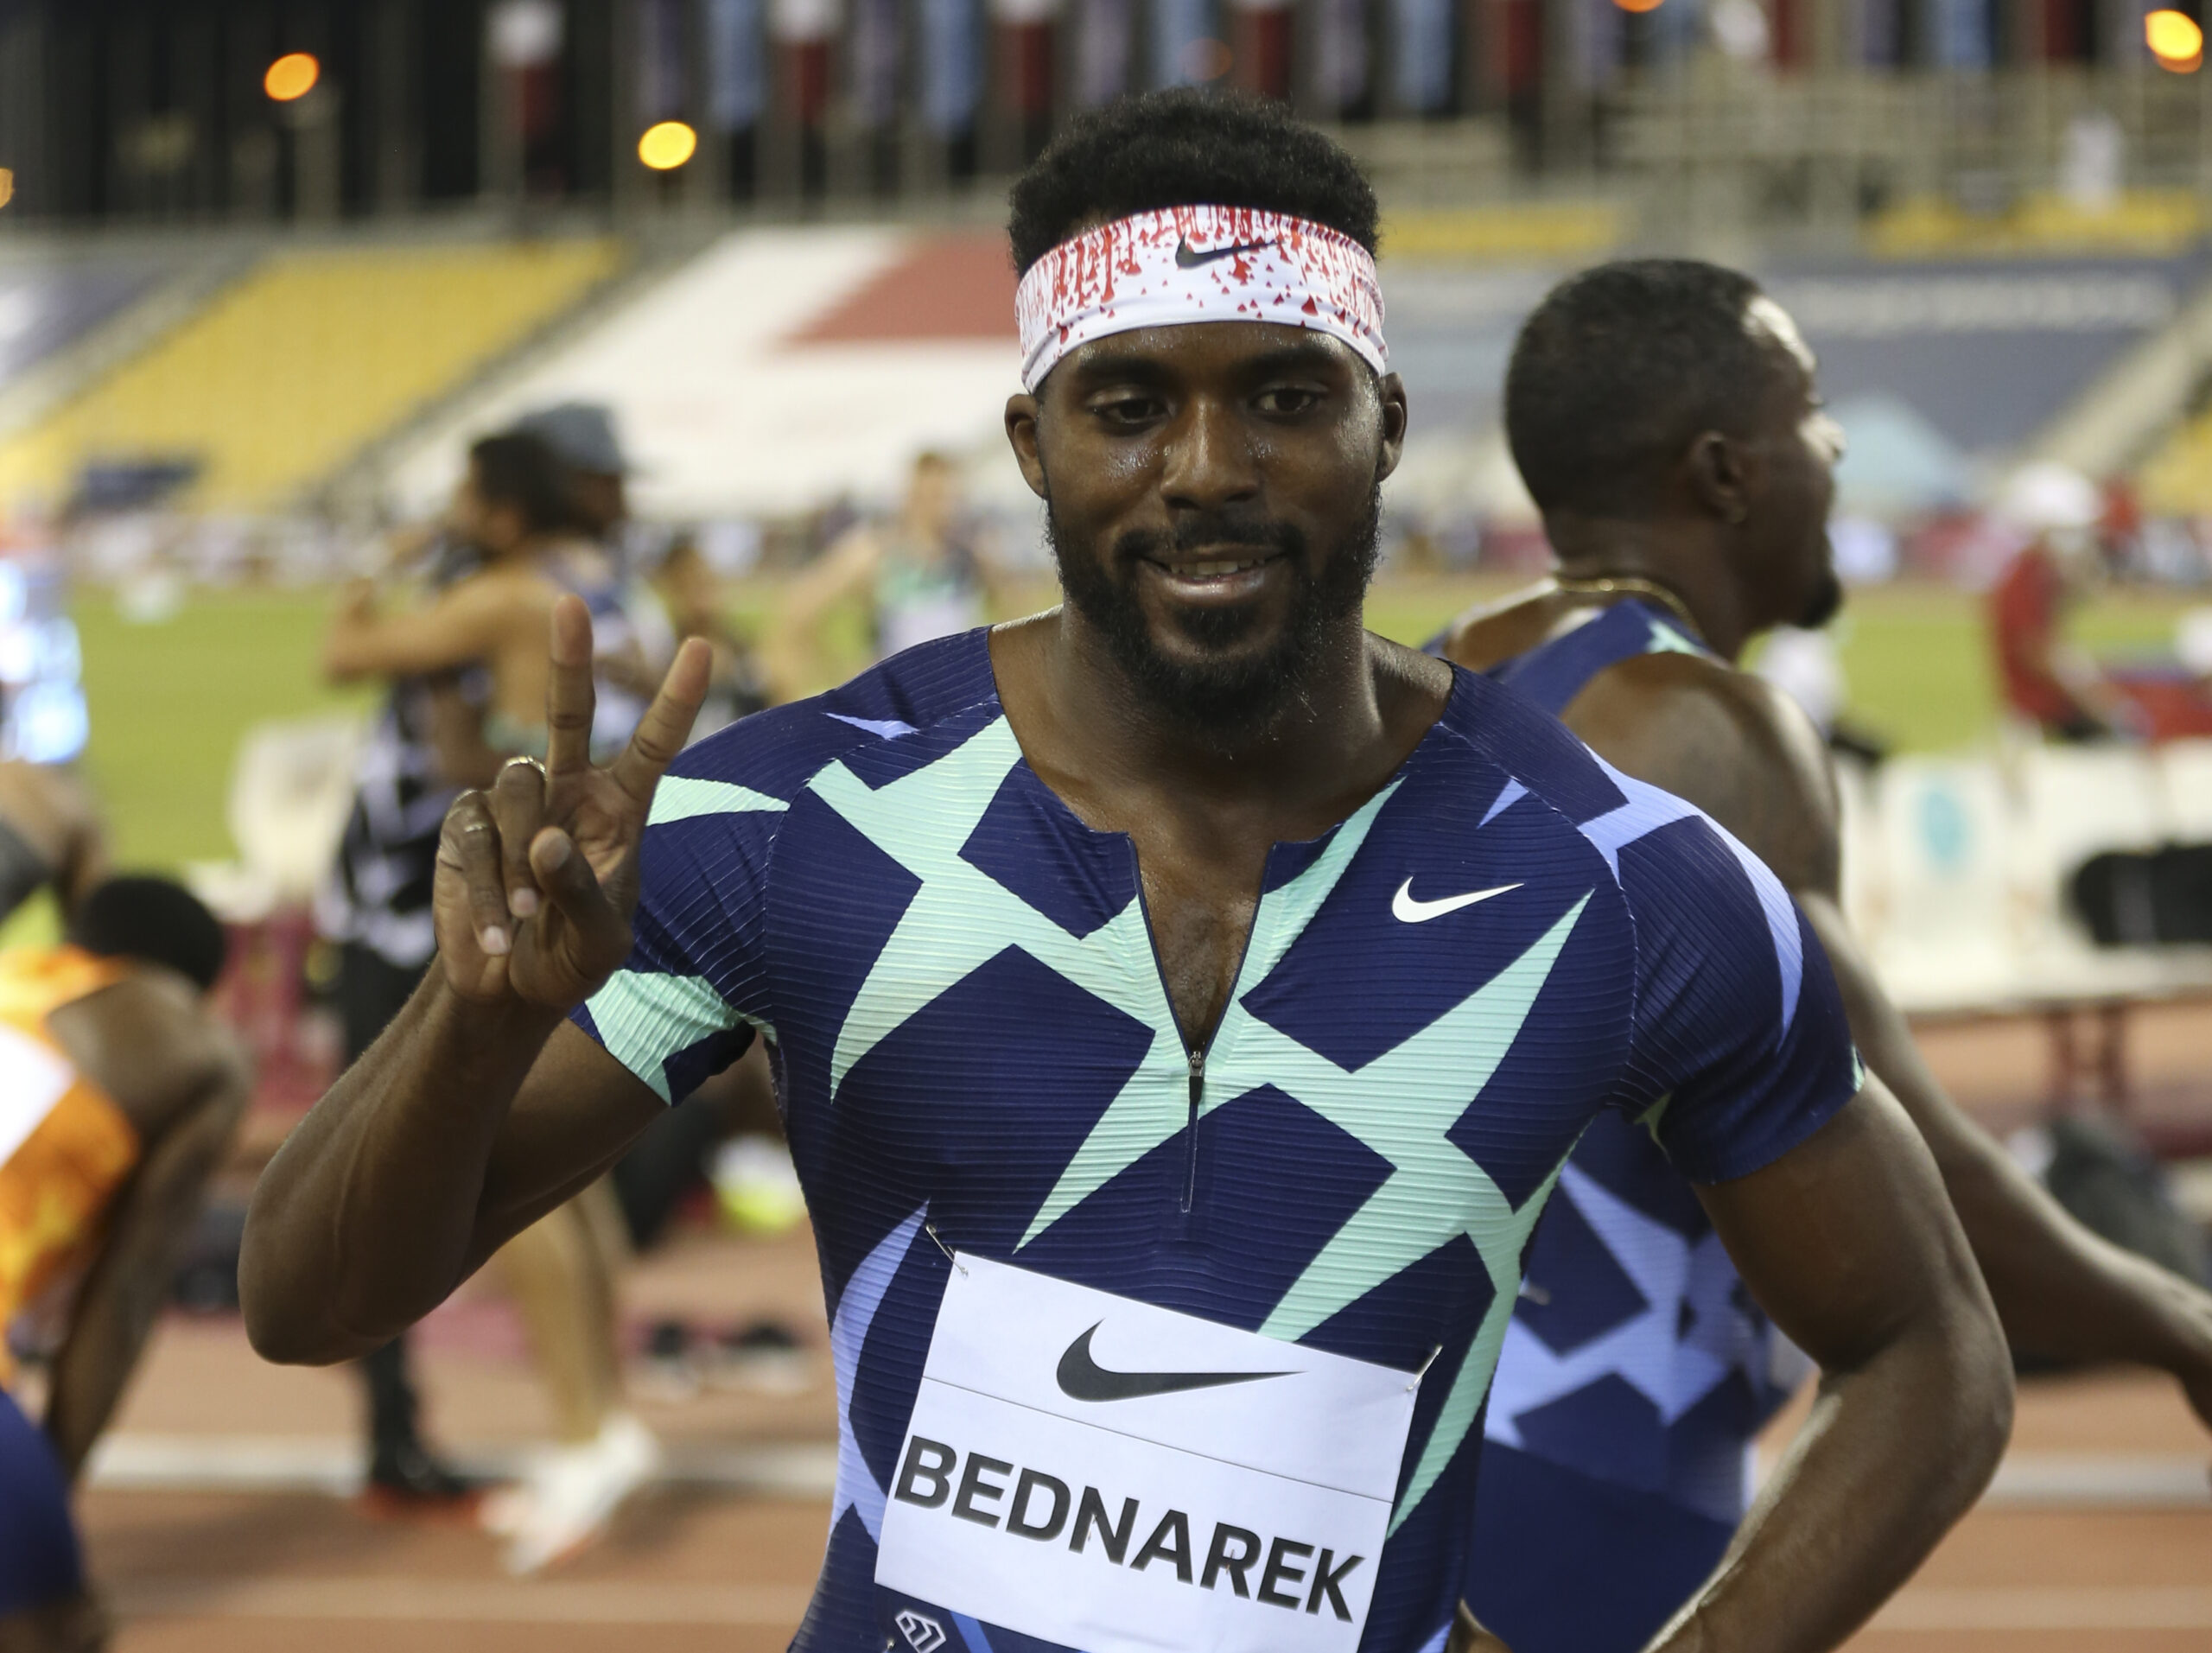 A man gives a peace sign to the camera after winning a sprint